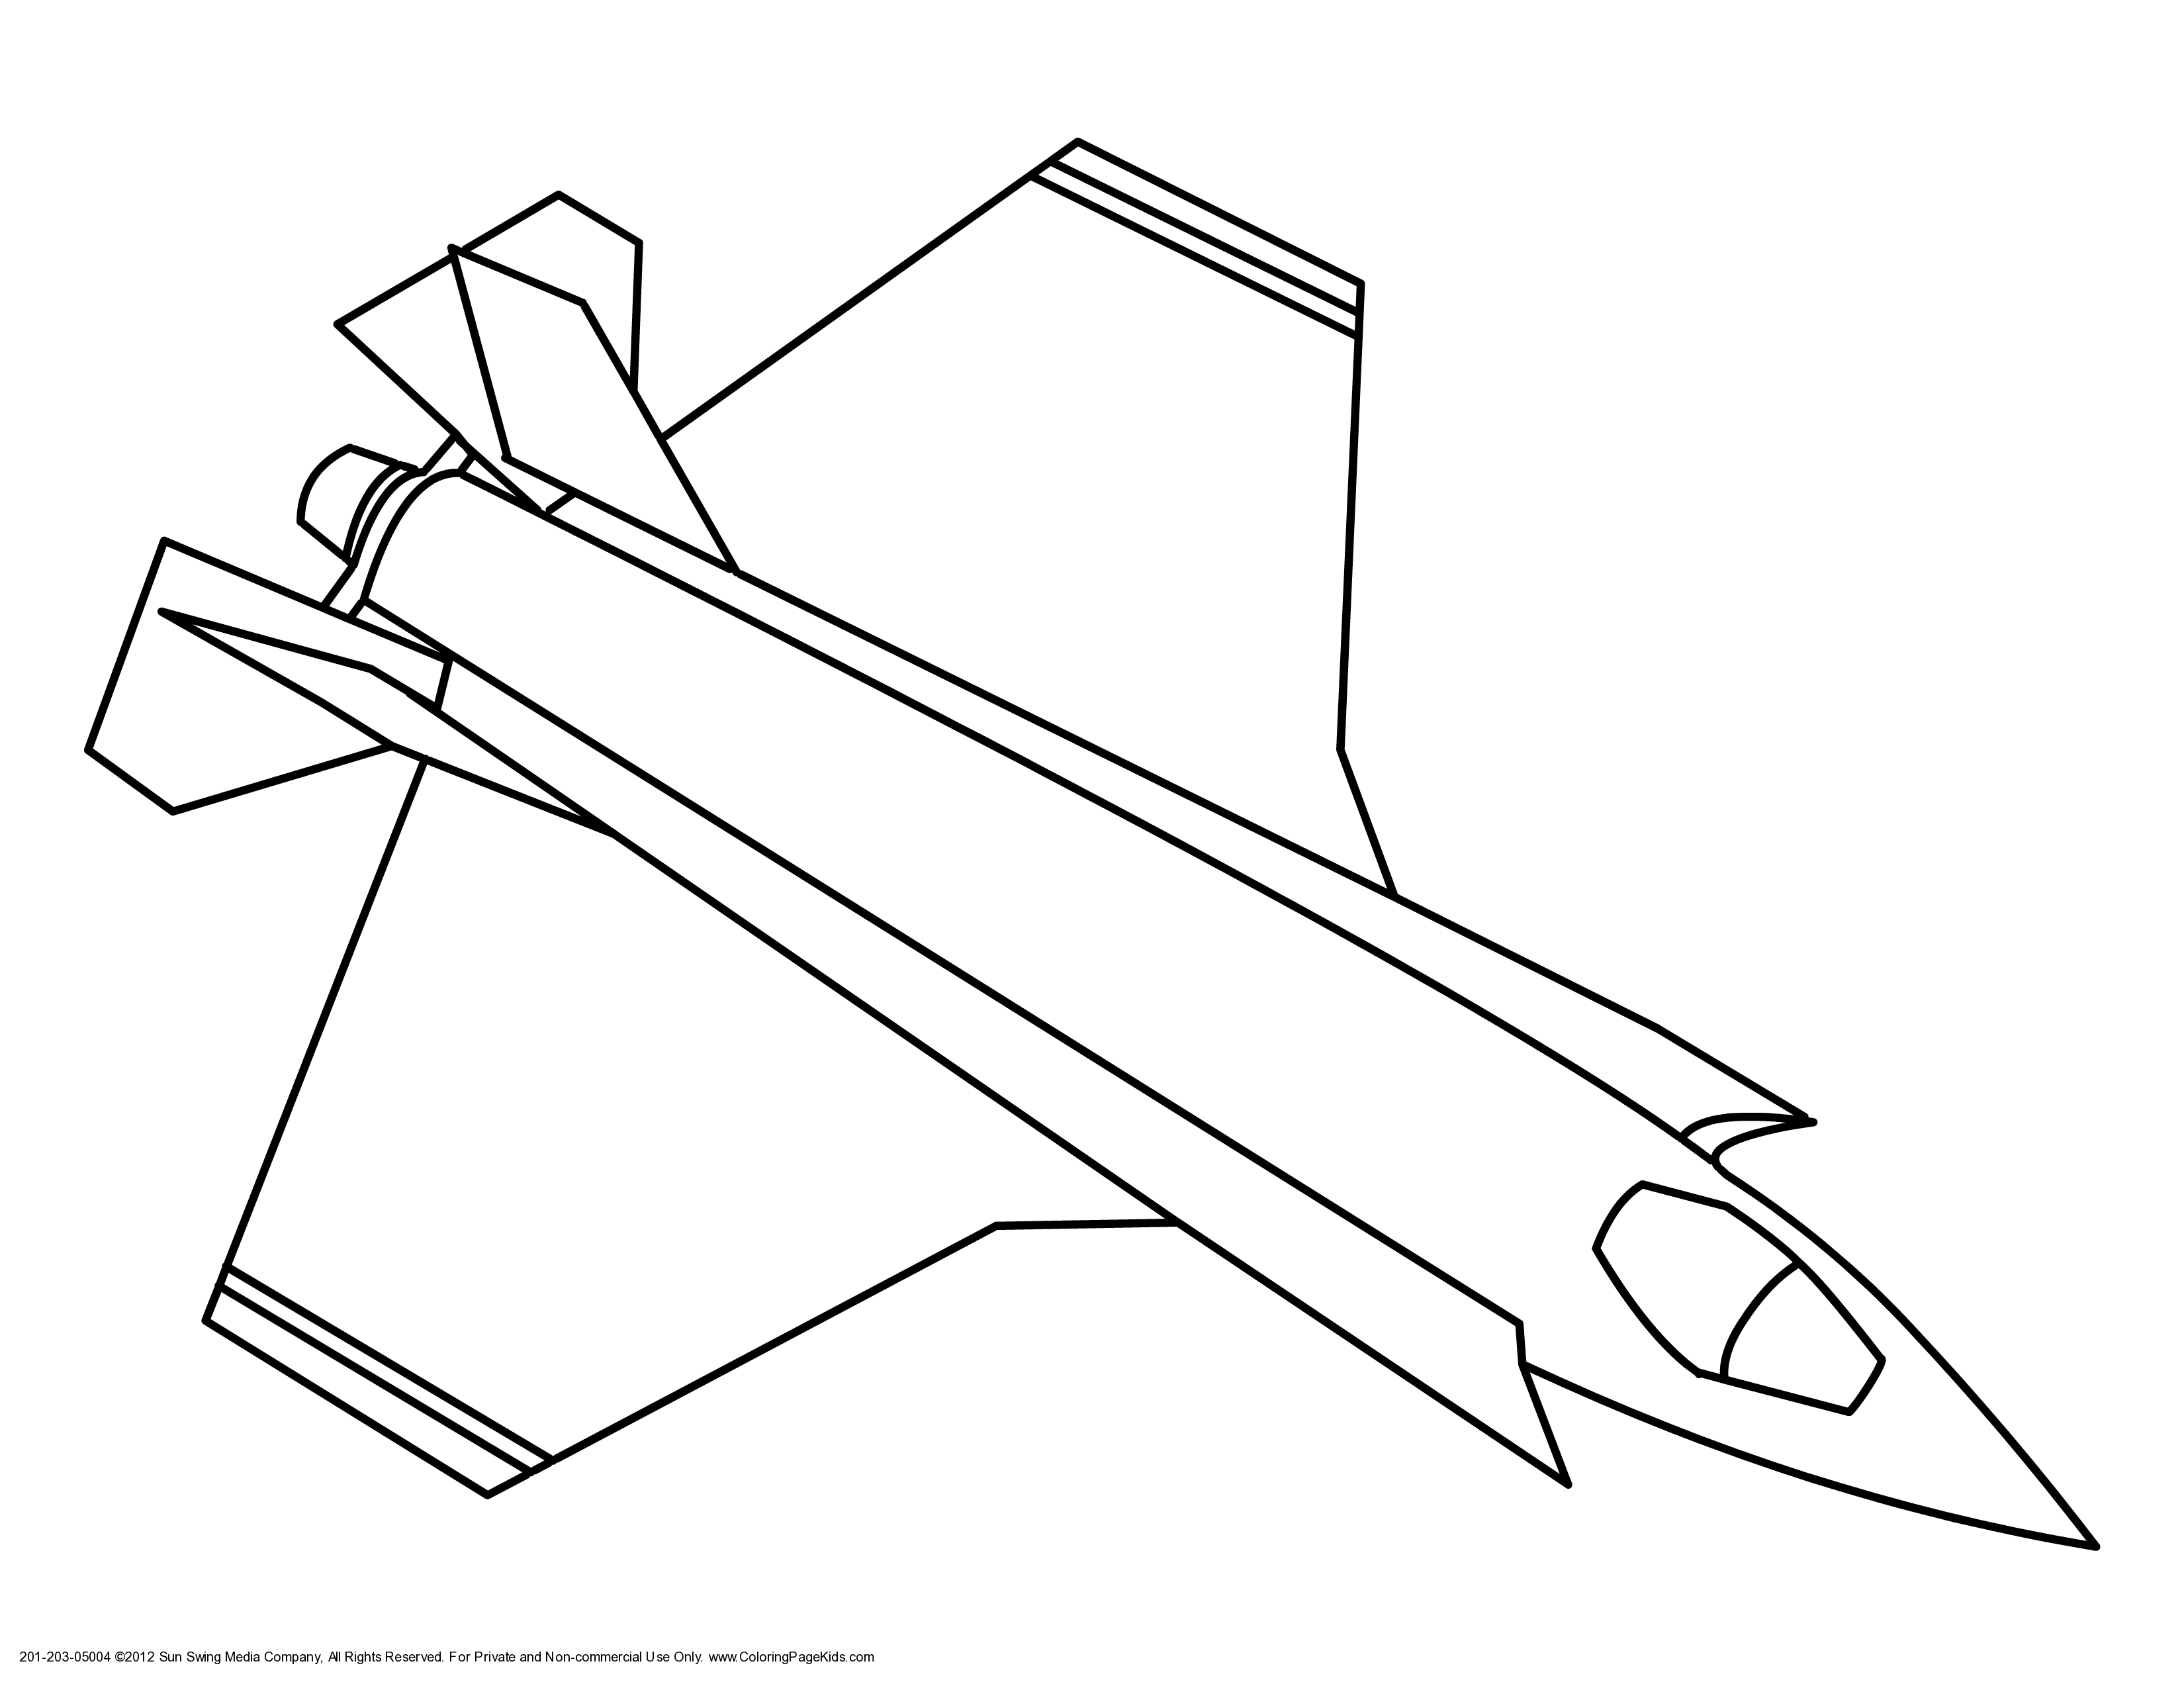 Airplane Coloring Pages Cars - Coloring Pages For All Ages